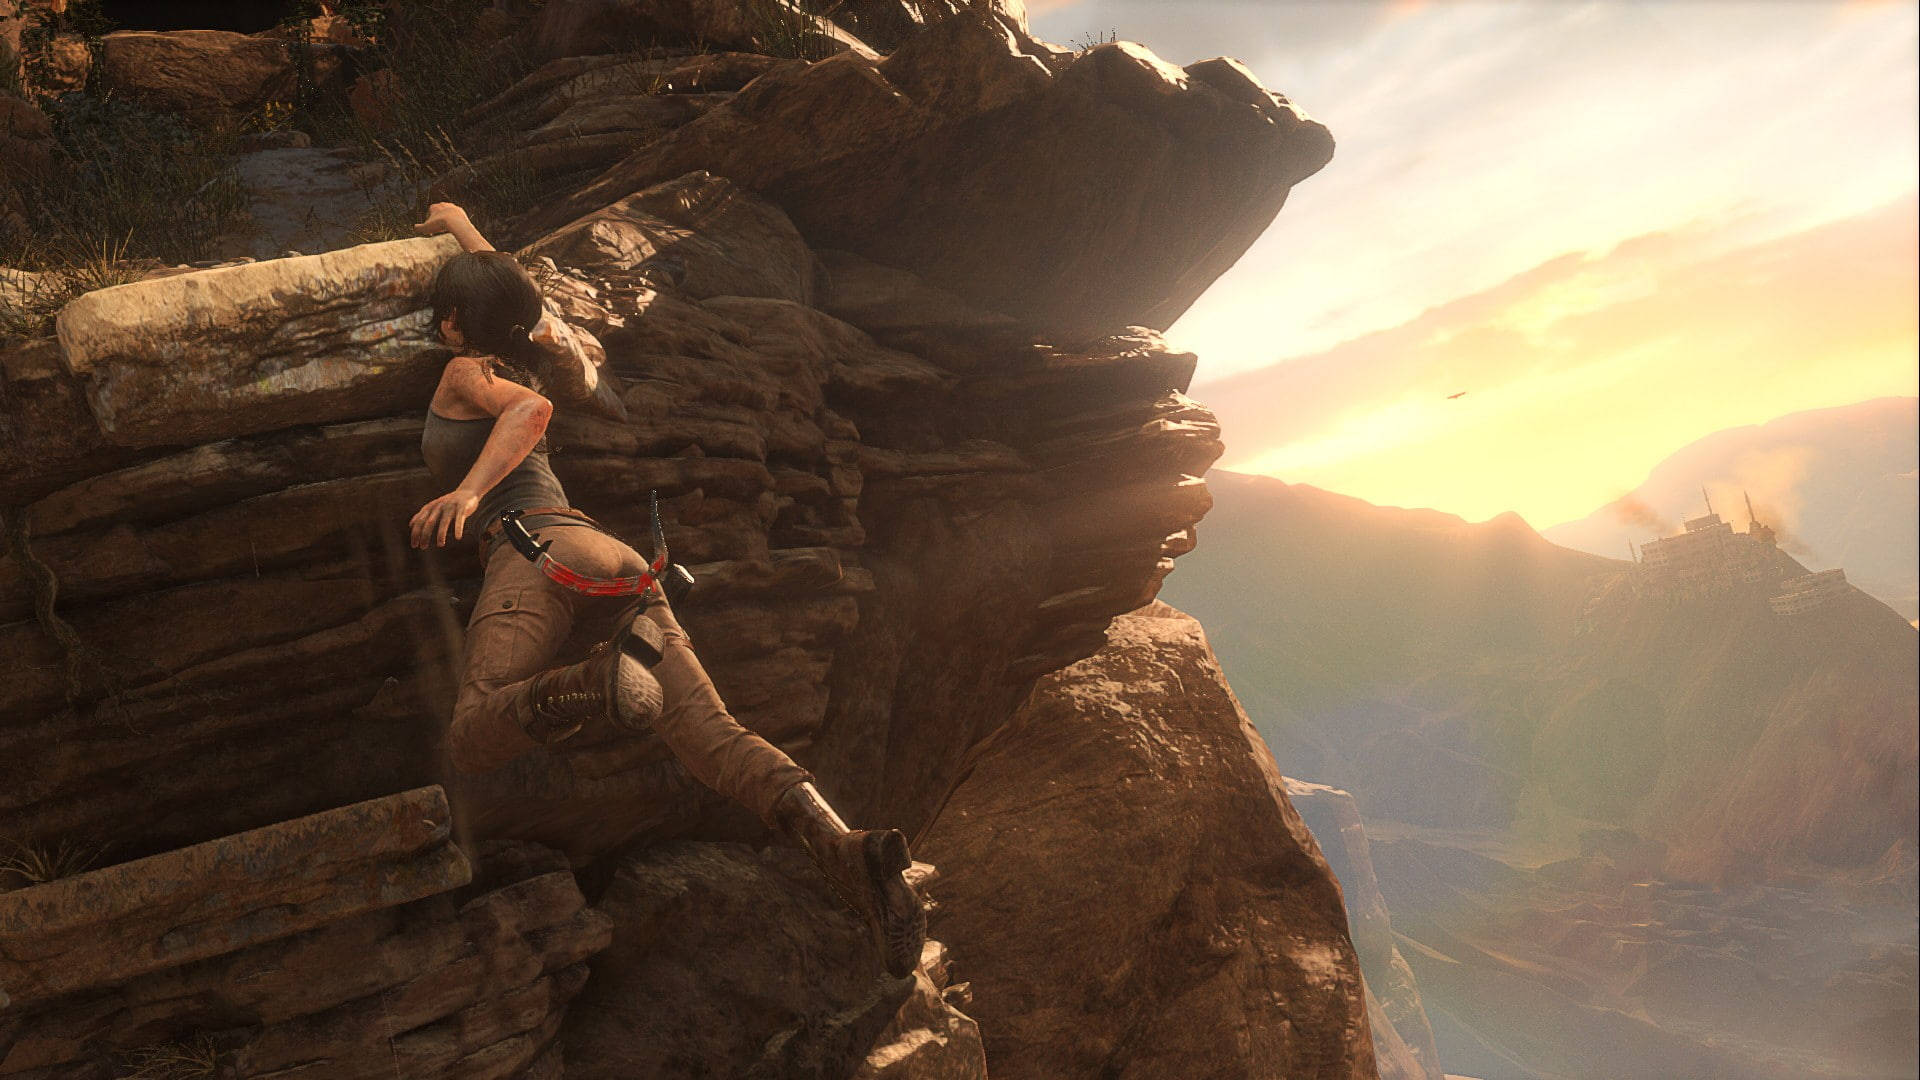 Intense Cliff Hanging Moment In Rise Of The Tomb Raider. Background